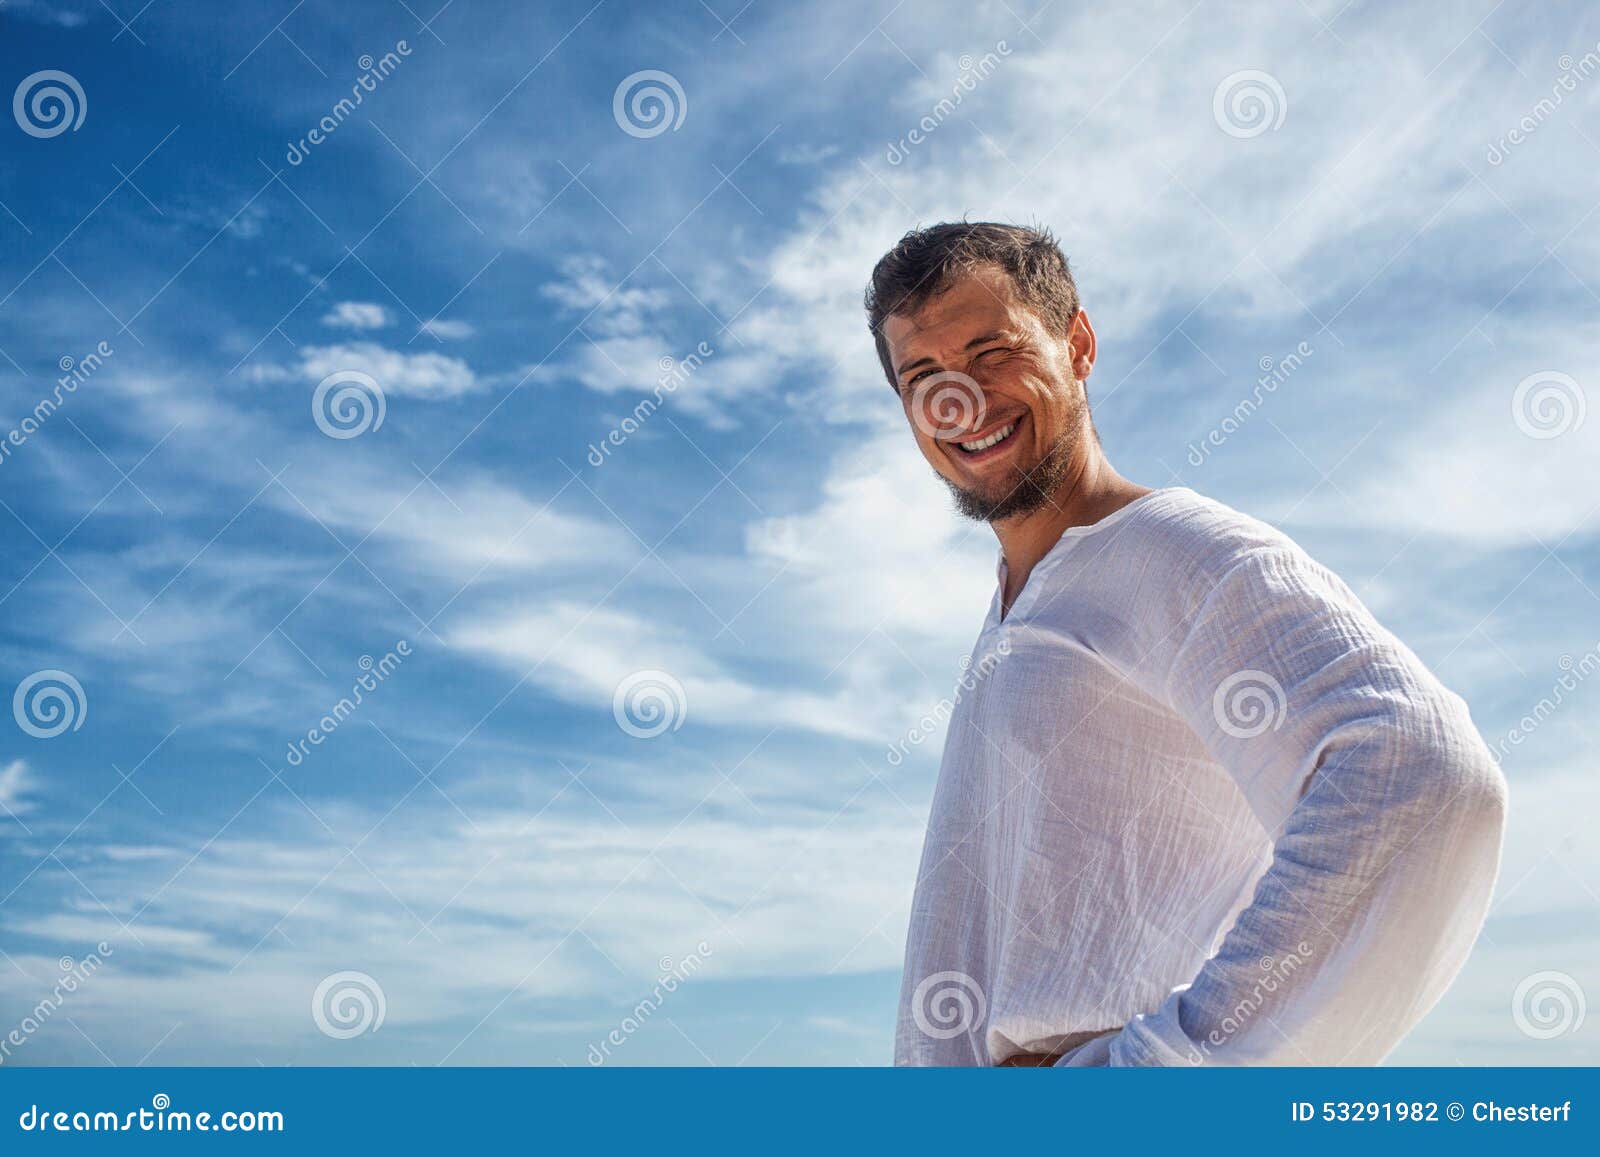 Man Standing before Blue Skies with Clouds Stock Photo - Image of warm ...